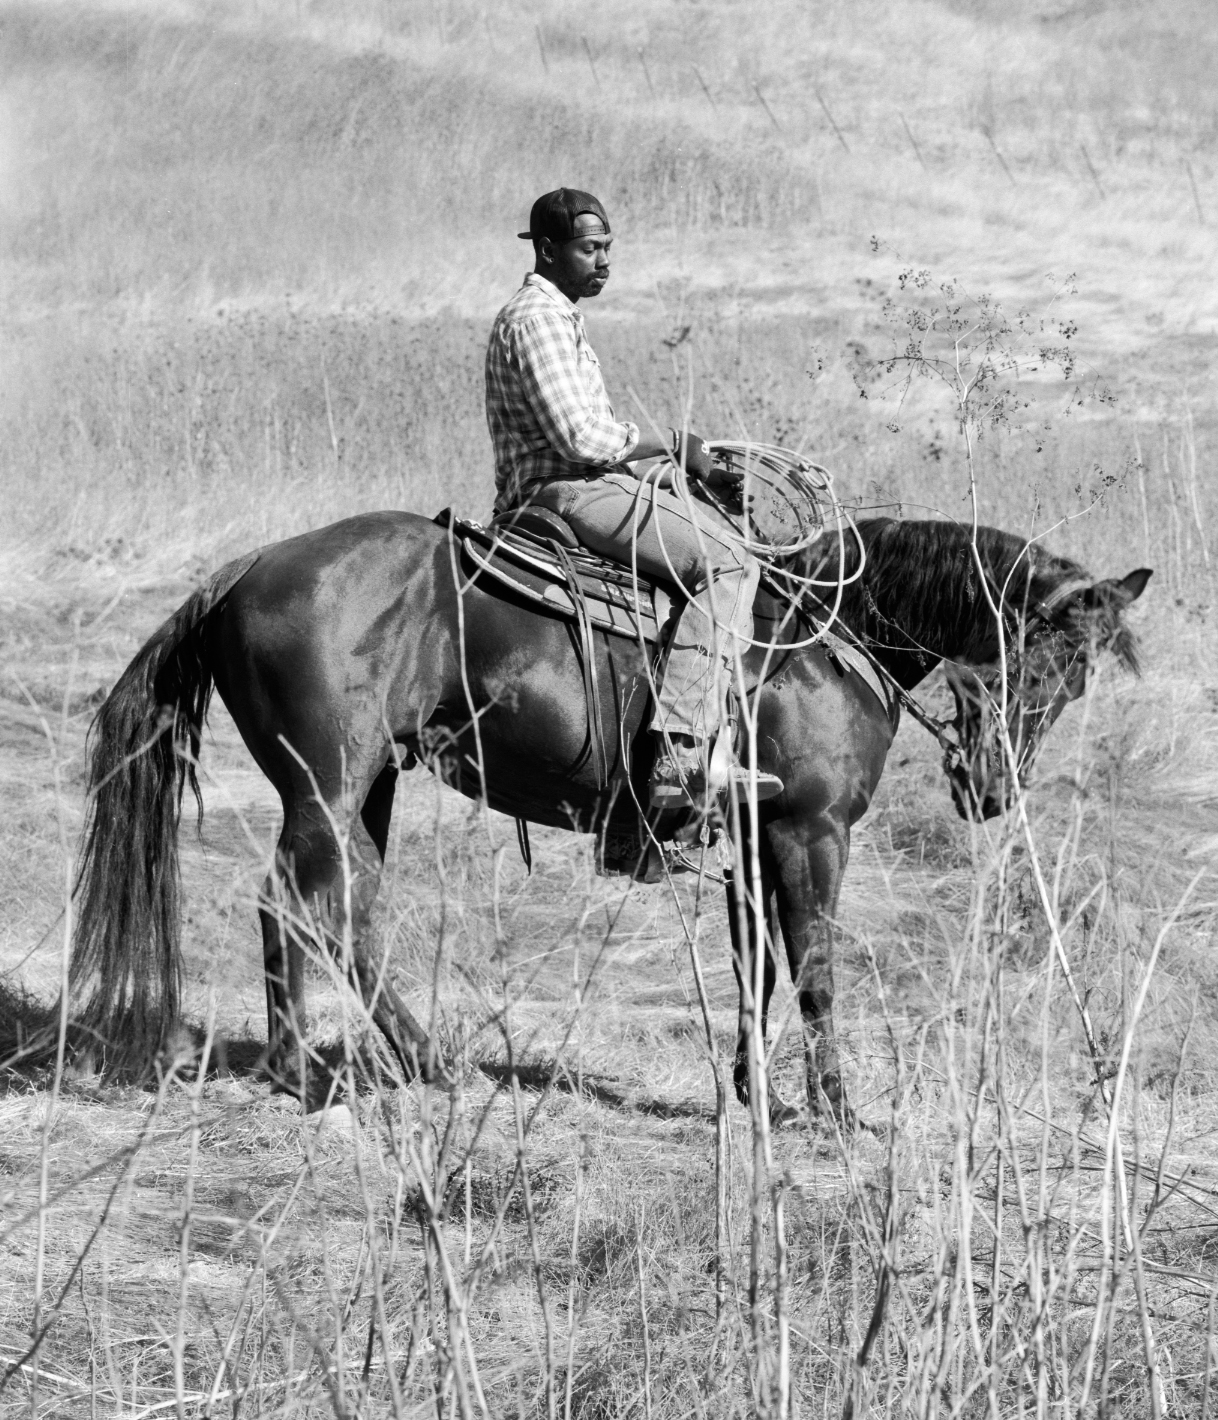 Black-and-white photograph of a Black man on horseback, in profile